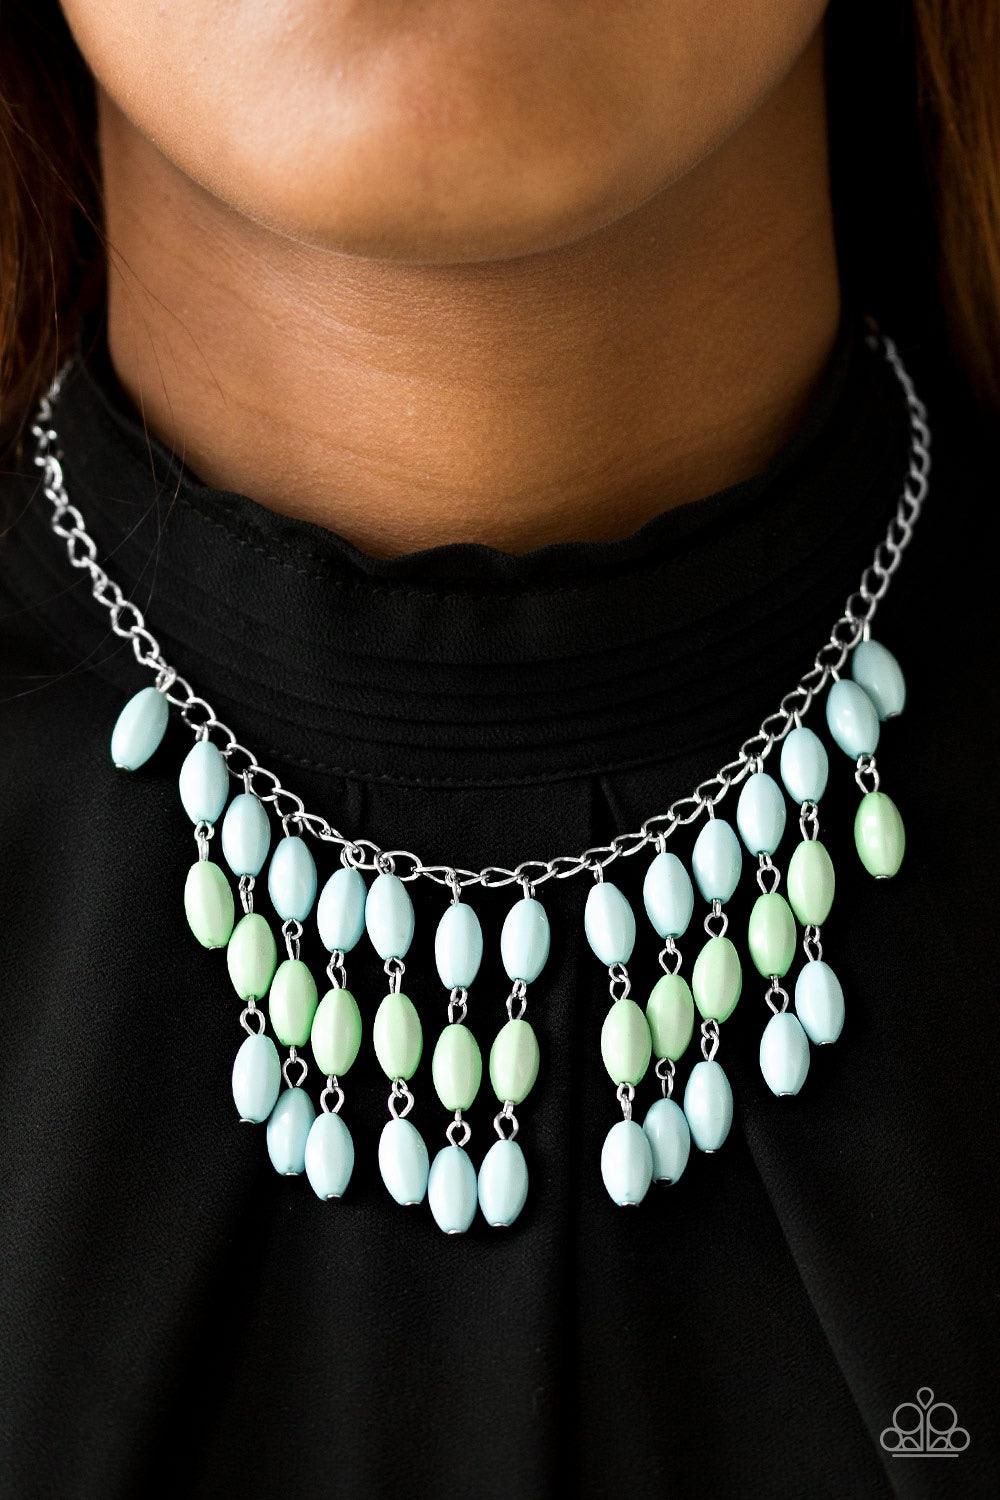 Paparazzi Accessories Delhi Diva - Blue Faceted blue and green beads cascade from the bottom of a shimmery silver chain, creating a flirty fringe below the collar. Features an adjustable clasp closure. Jewelry